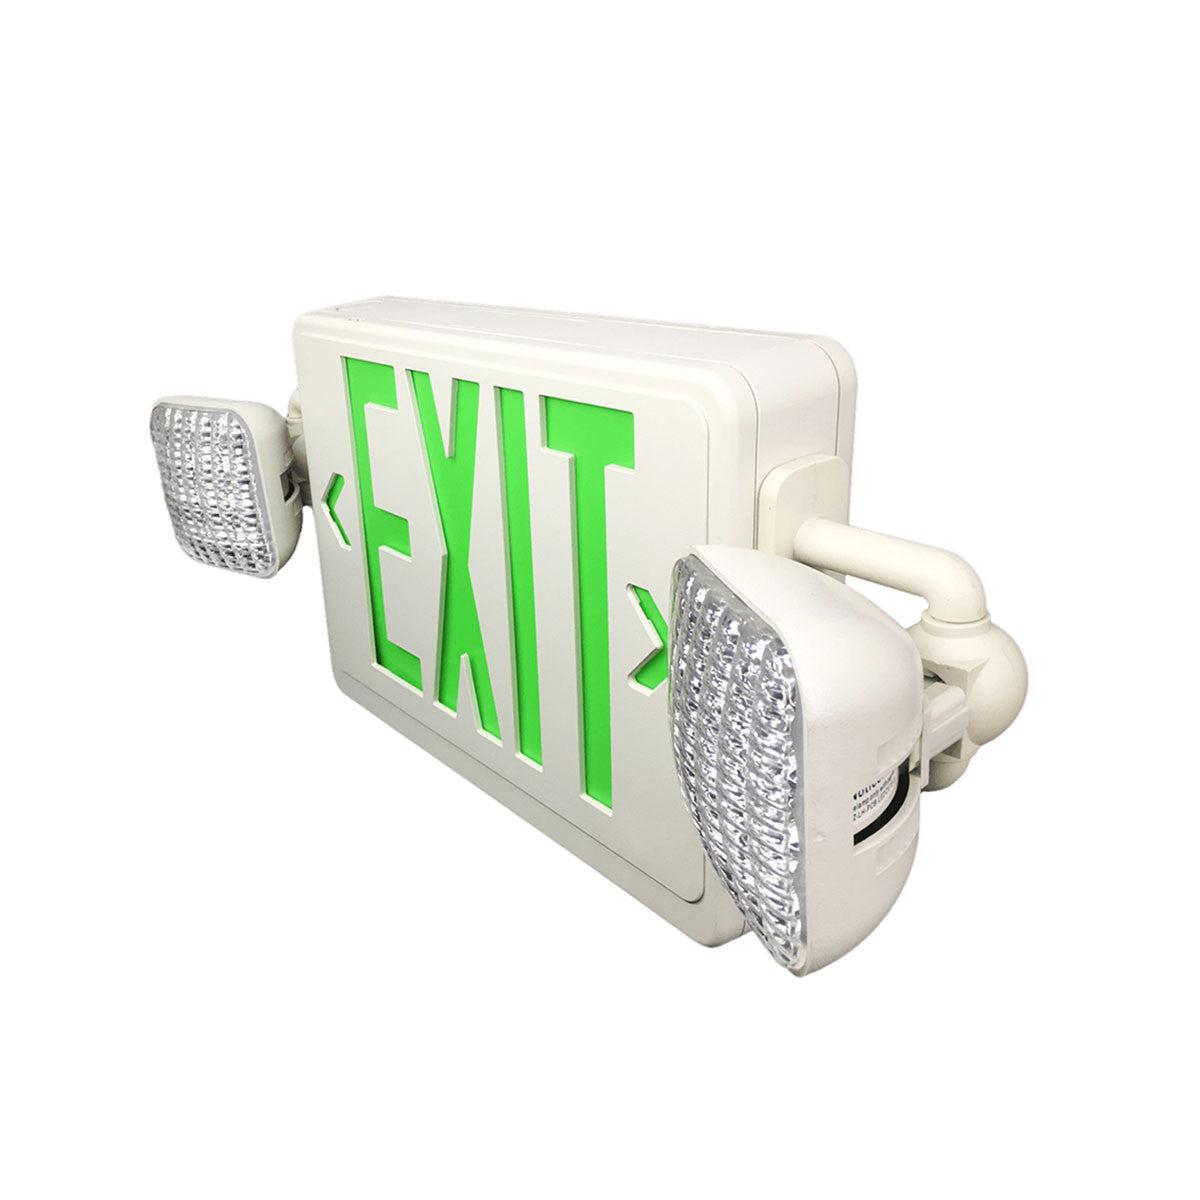 LOC-EXIT-3.5WGLW-SCOM - LED WHITE AND GREEN EXIT SIGN 3.5W SQUARE COMBO WITH HEADLIGHTS, EMERGENCY WATT 1.6W, UL & TITLE 20 LISTED